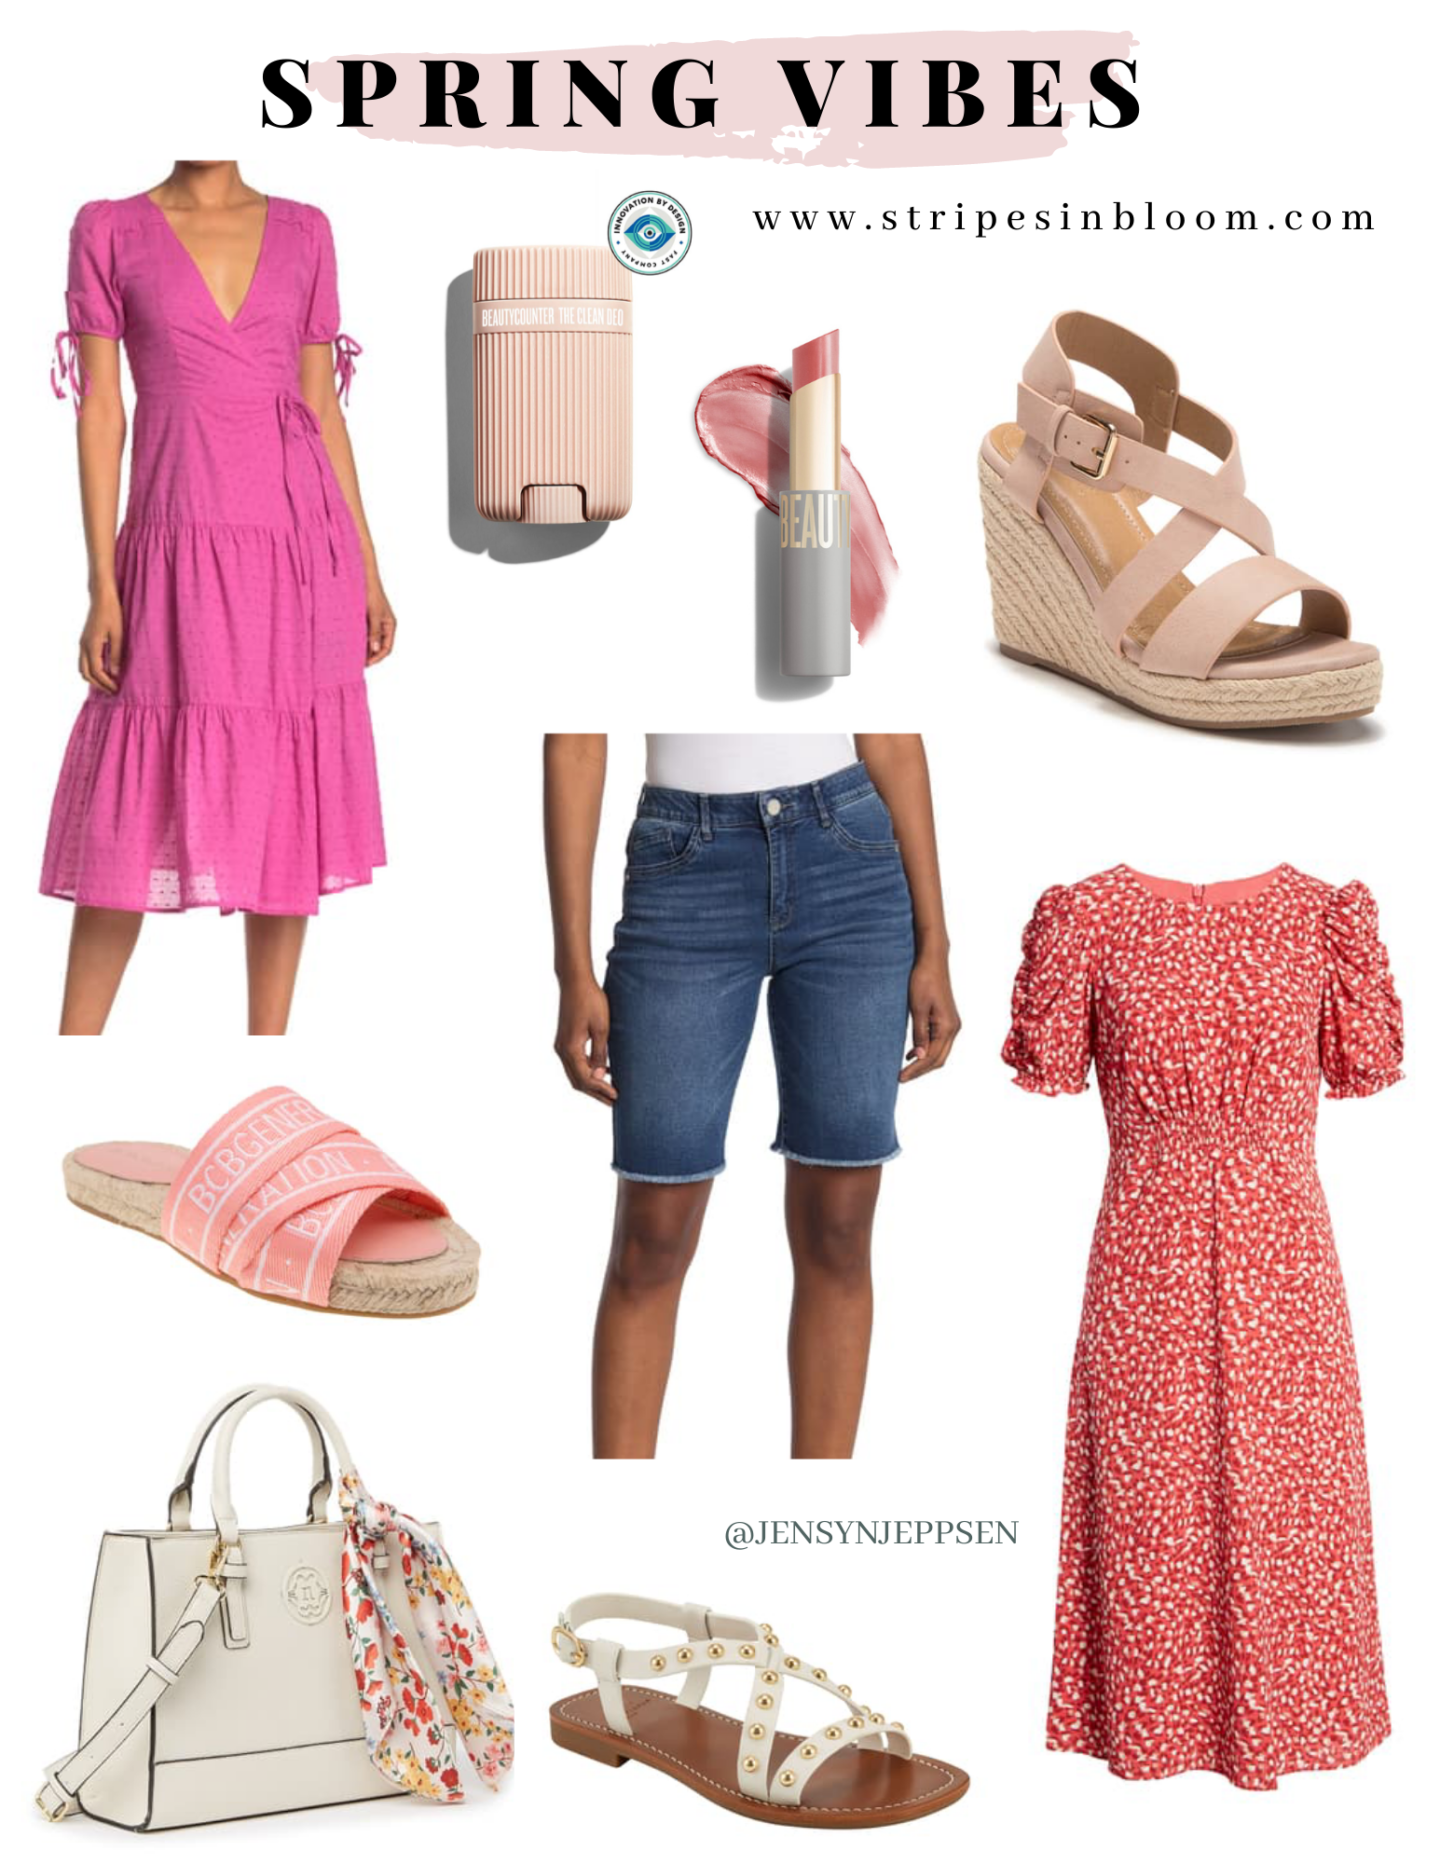 AFFORDABLE SPRING OUTFIT INSPIRATION